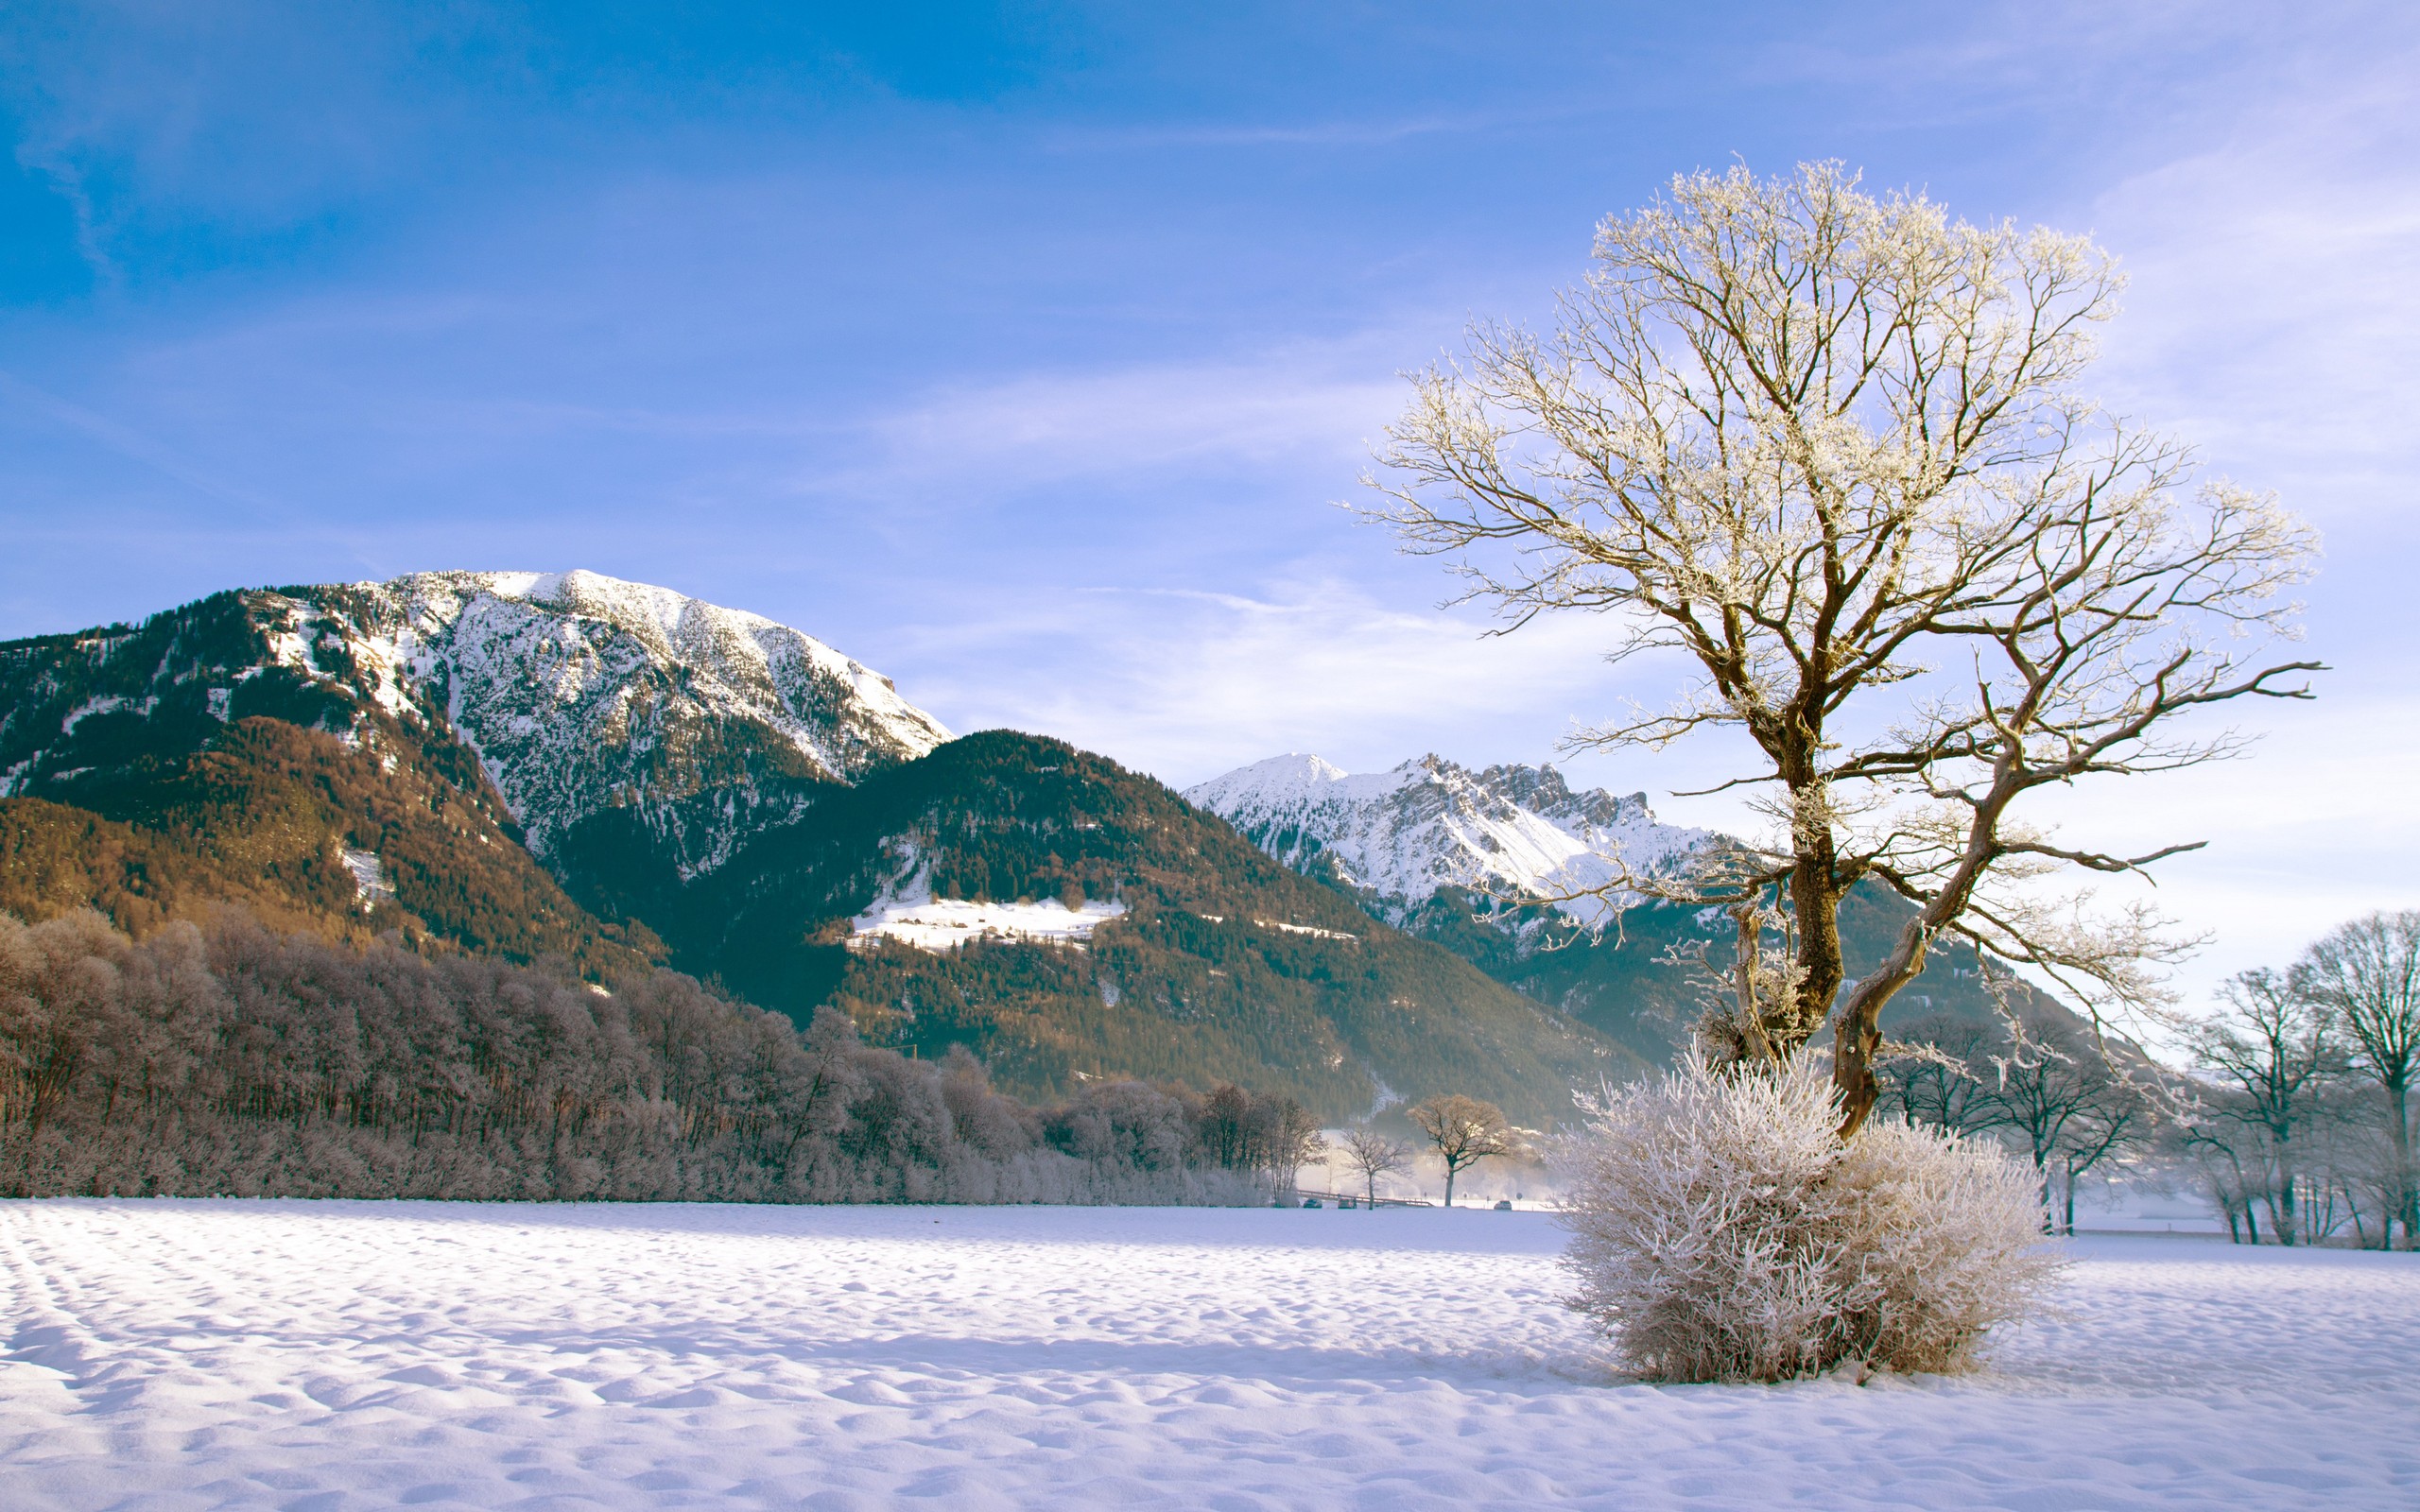 General 2560x1600 landscape snow winter trees frost mountains snowy mountain nature